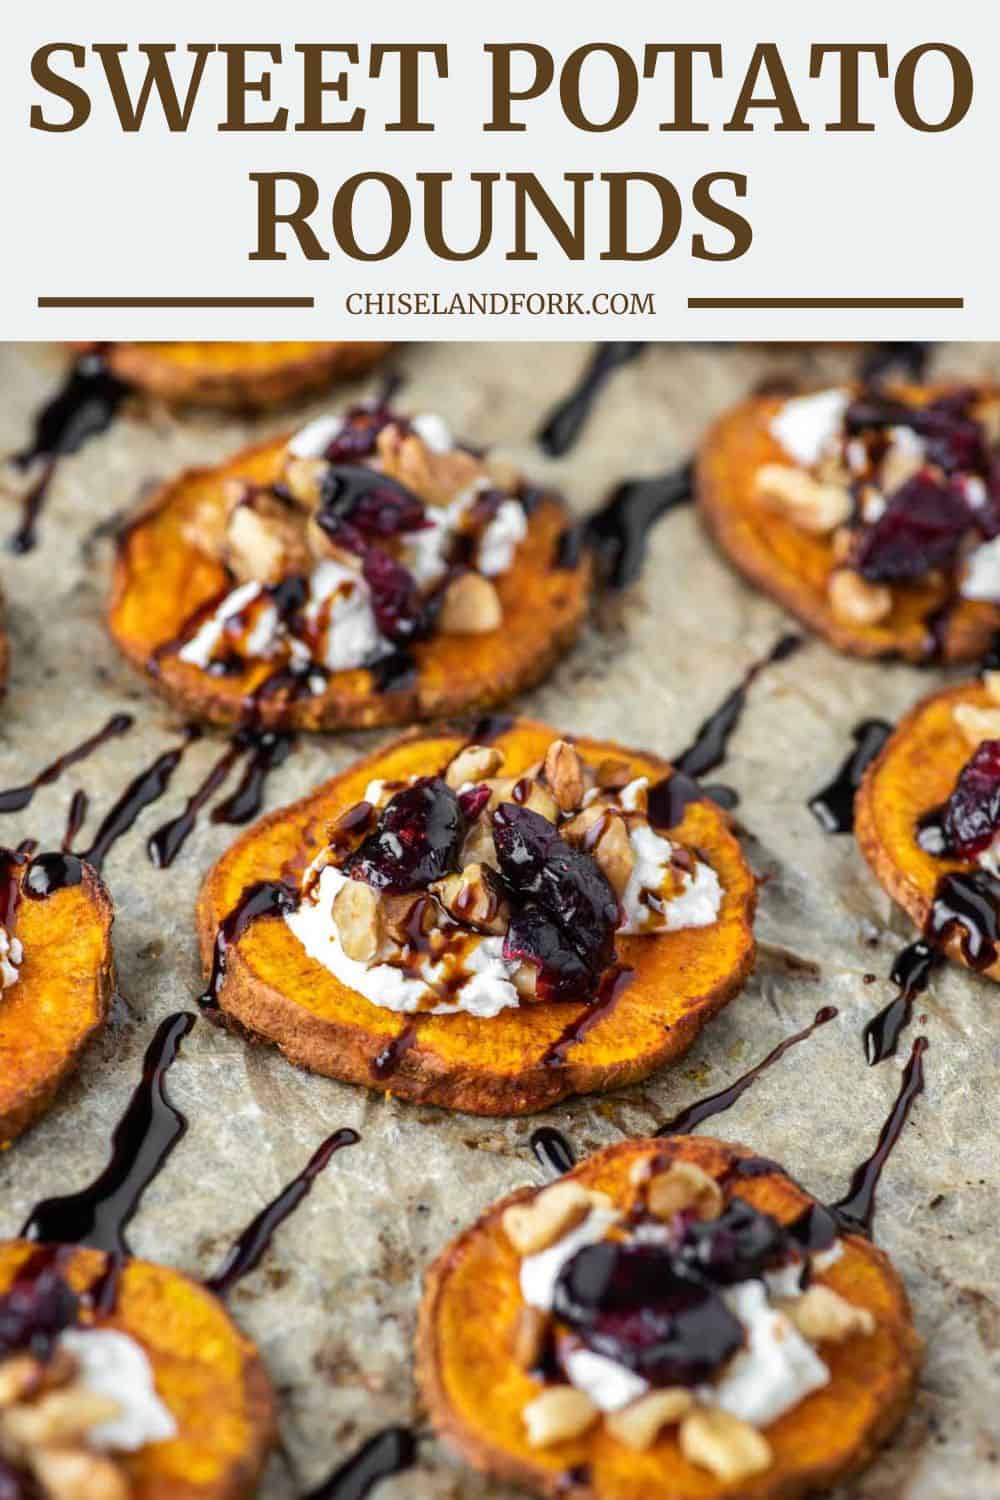 Sweet Potato Rounds with Goat Cheese Recipe - Chisel & Fork